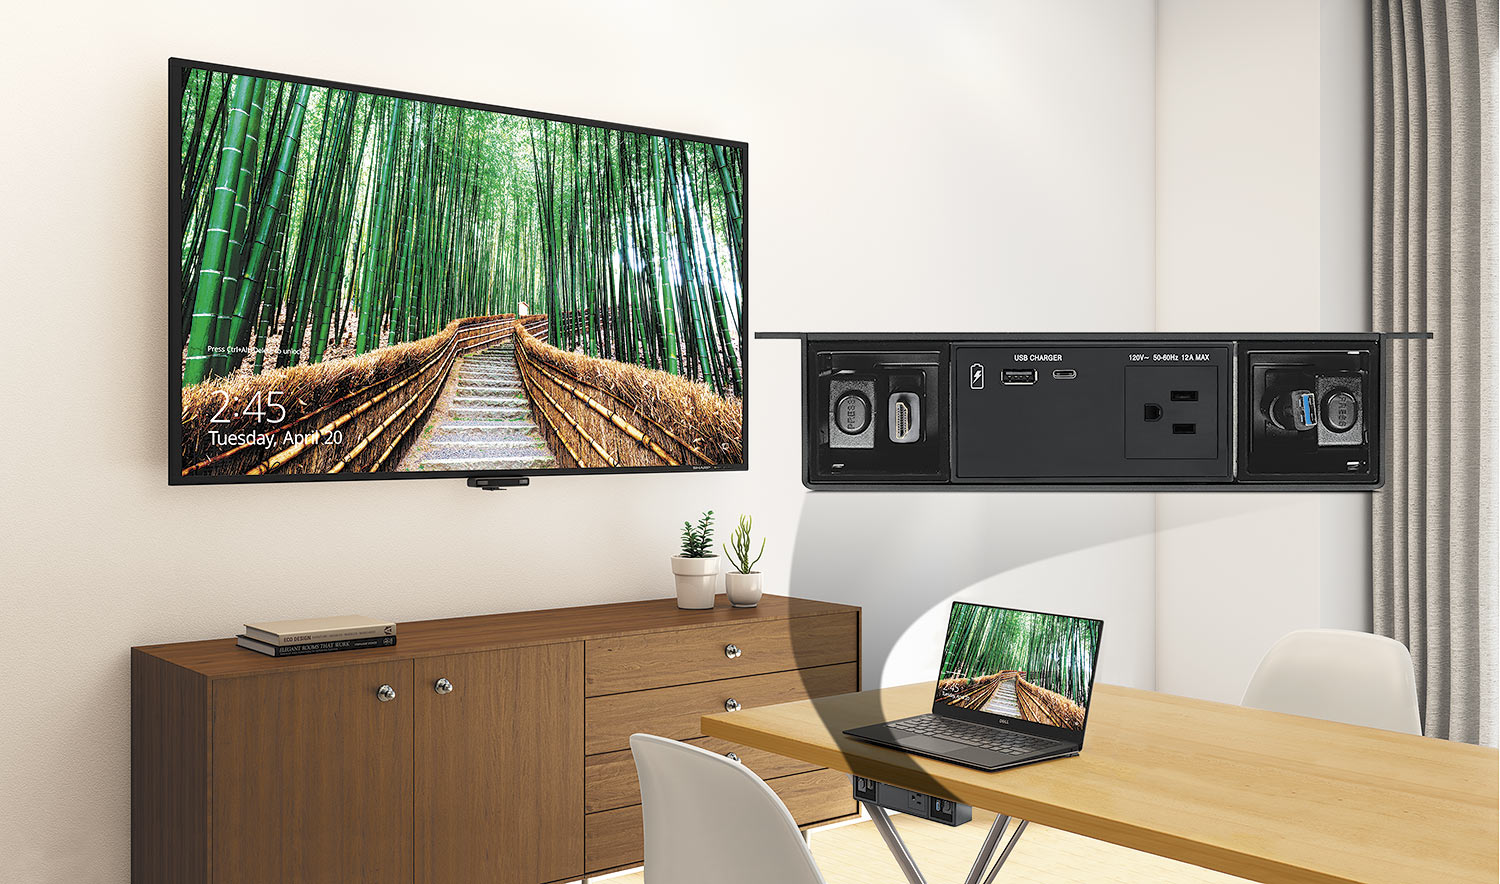 Cable Cubby F55 UT transforms an ordinary room into a technology-rich environment